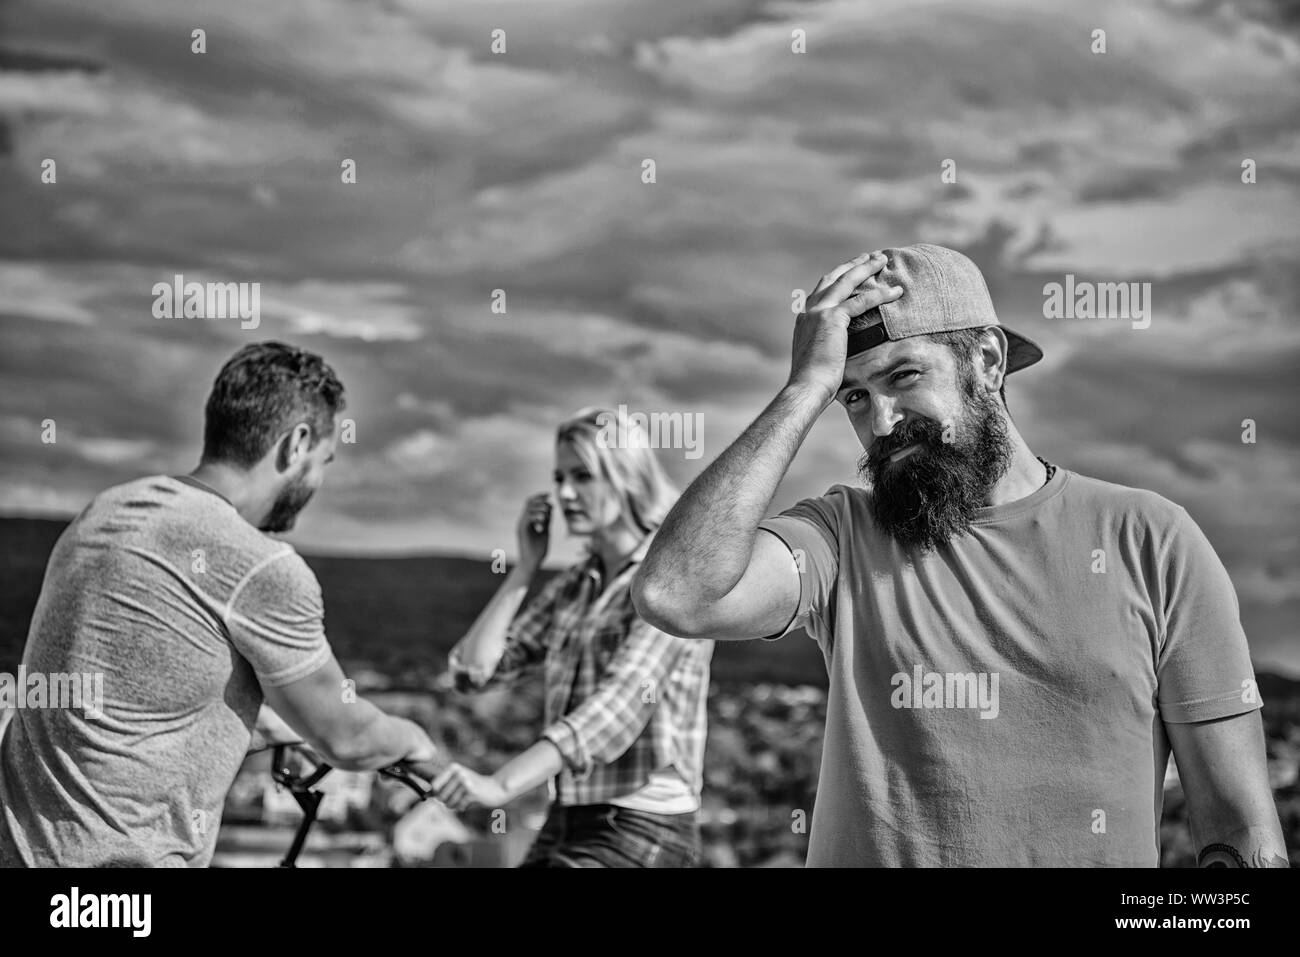 No romantic in his life. Man hipster feels lonely couple dating behind him. Man regret not asked her go out. Now she dating with another guy. Hipster regretful face in front of couple in love. Stock Photo